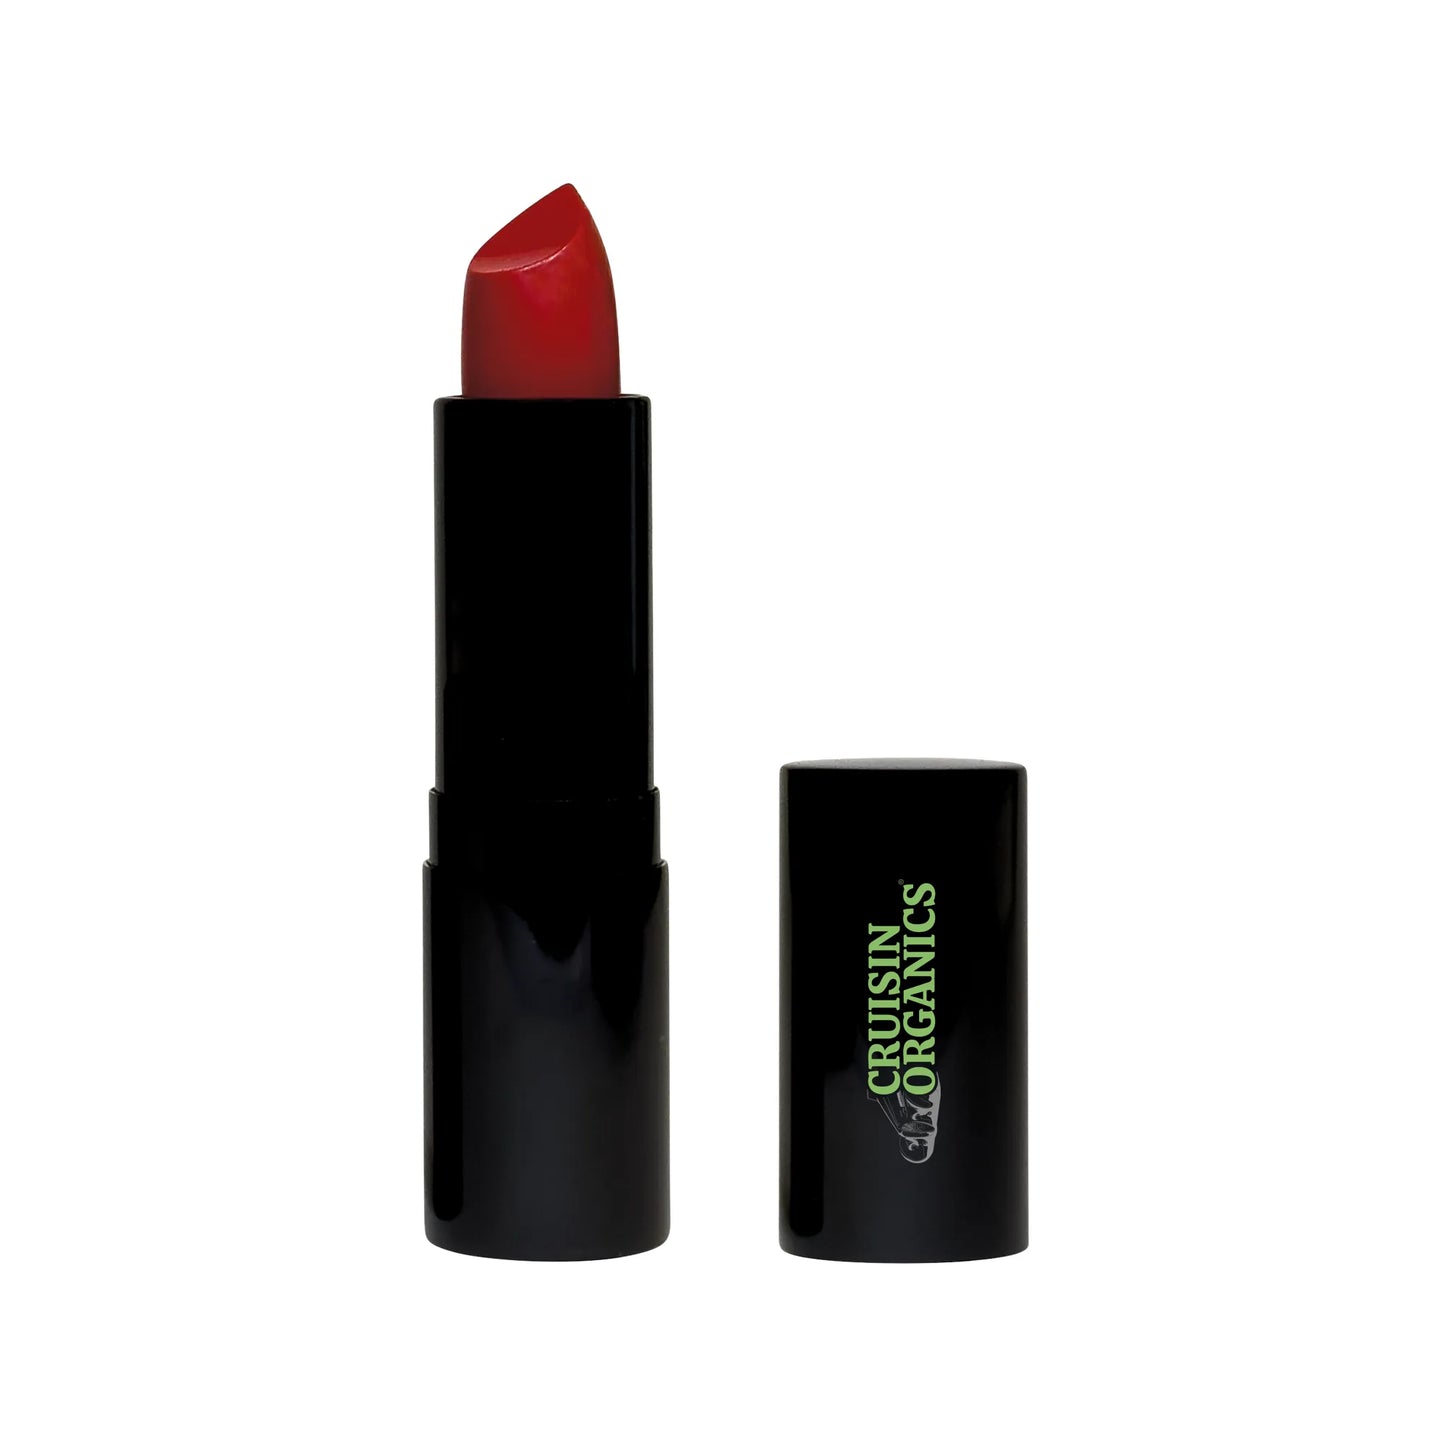  Accentuate your natural beauty with Cruisin Organics Regal Red Cream Lipstick. Enriched with allantoin, this luxurious lipstick not only provides a rich, long-lasting color but also nourishes and protects your lips. Truly indulge in a premium lip experience with our Creamy Regal Red Lipstick. with Regal Red.